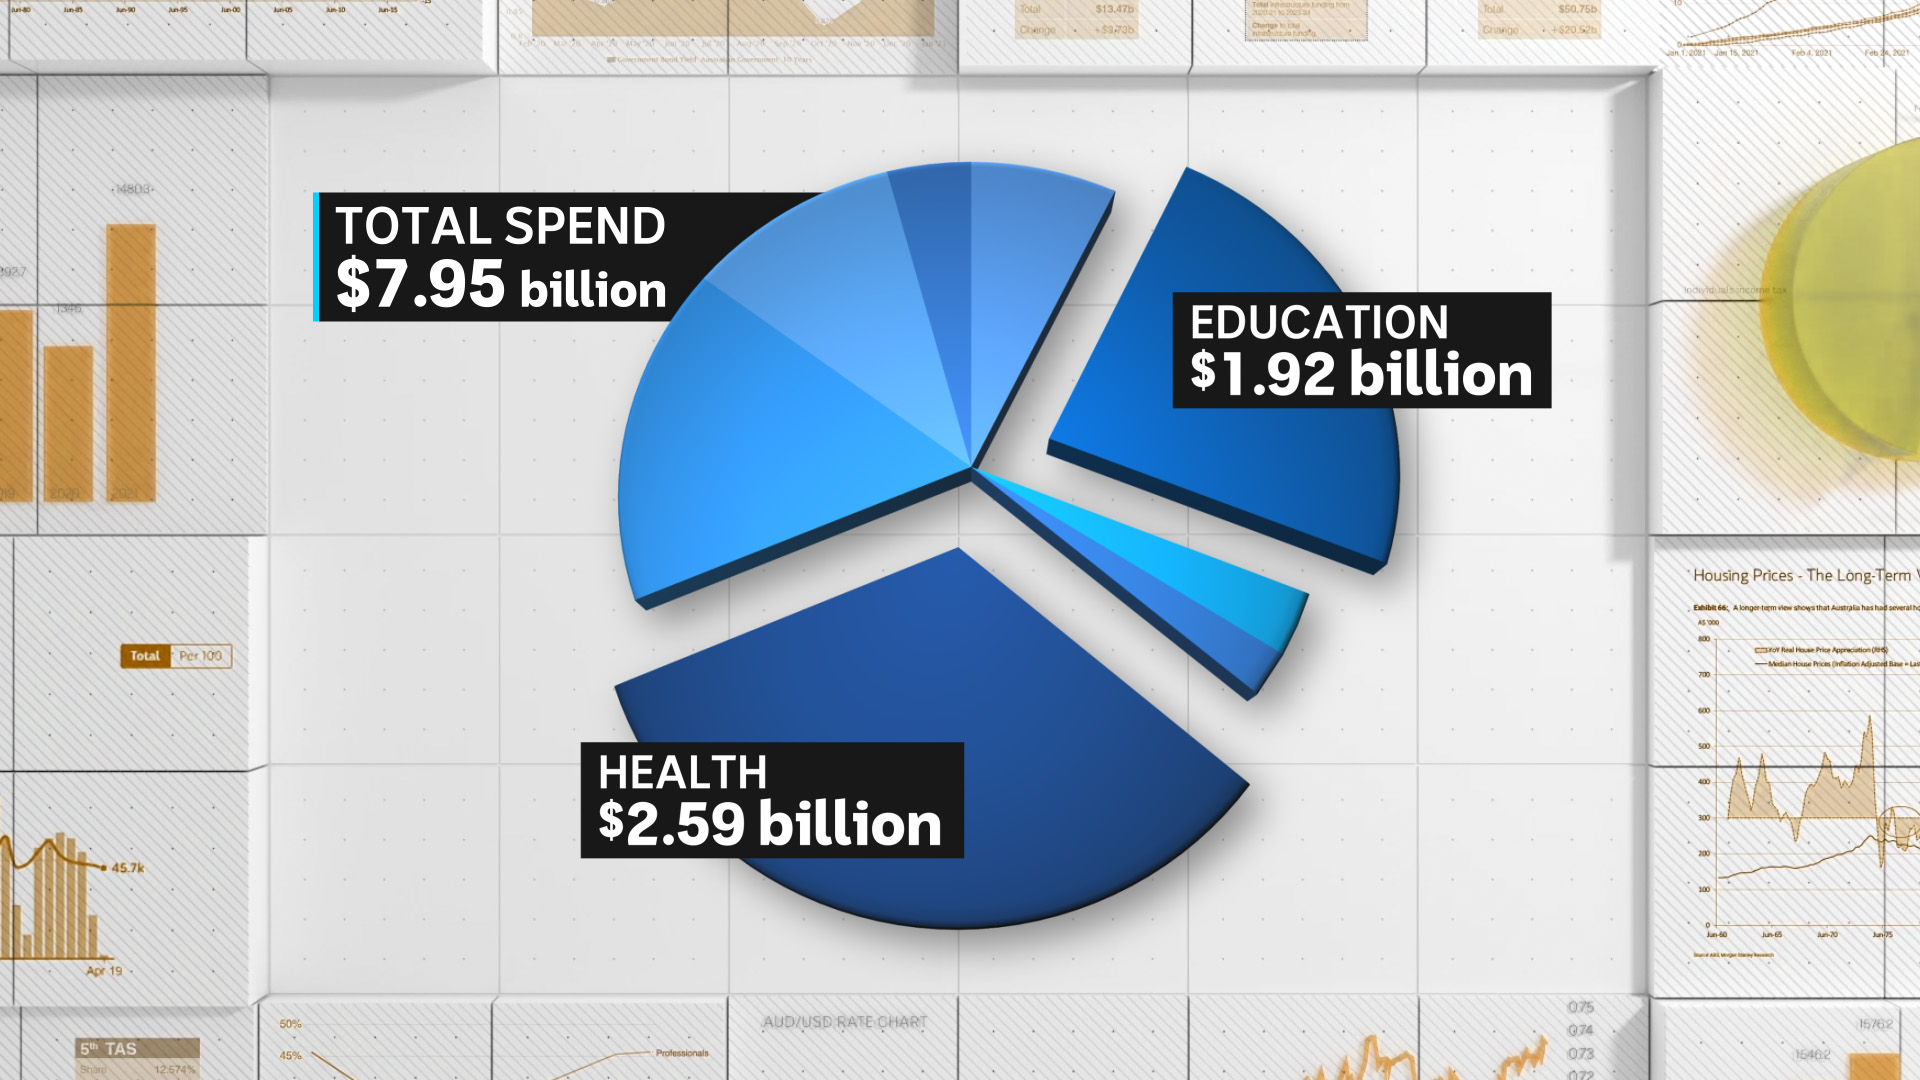 A pie graph showing the $7.95 billion budger — $1.92 billion goes to education and $2.59 billion to health.